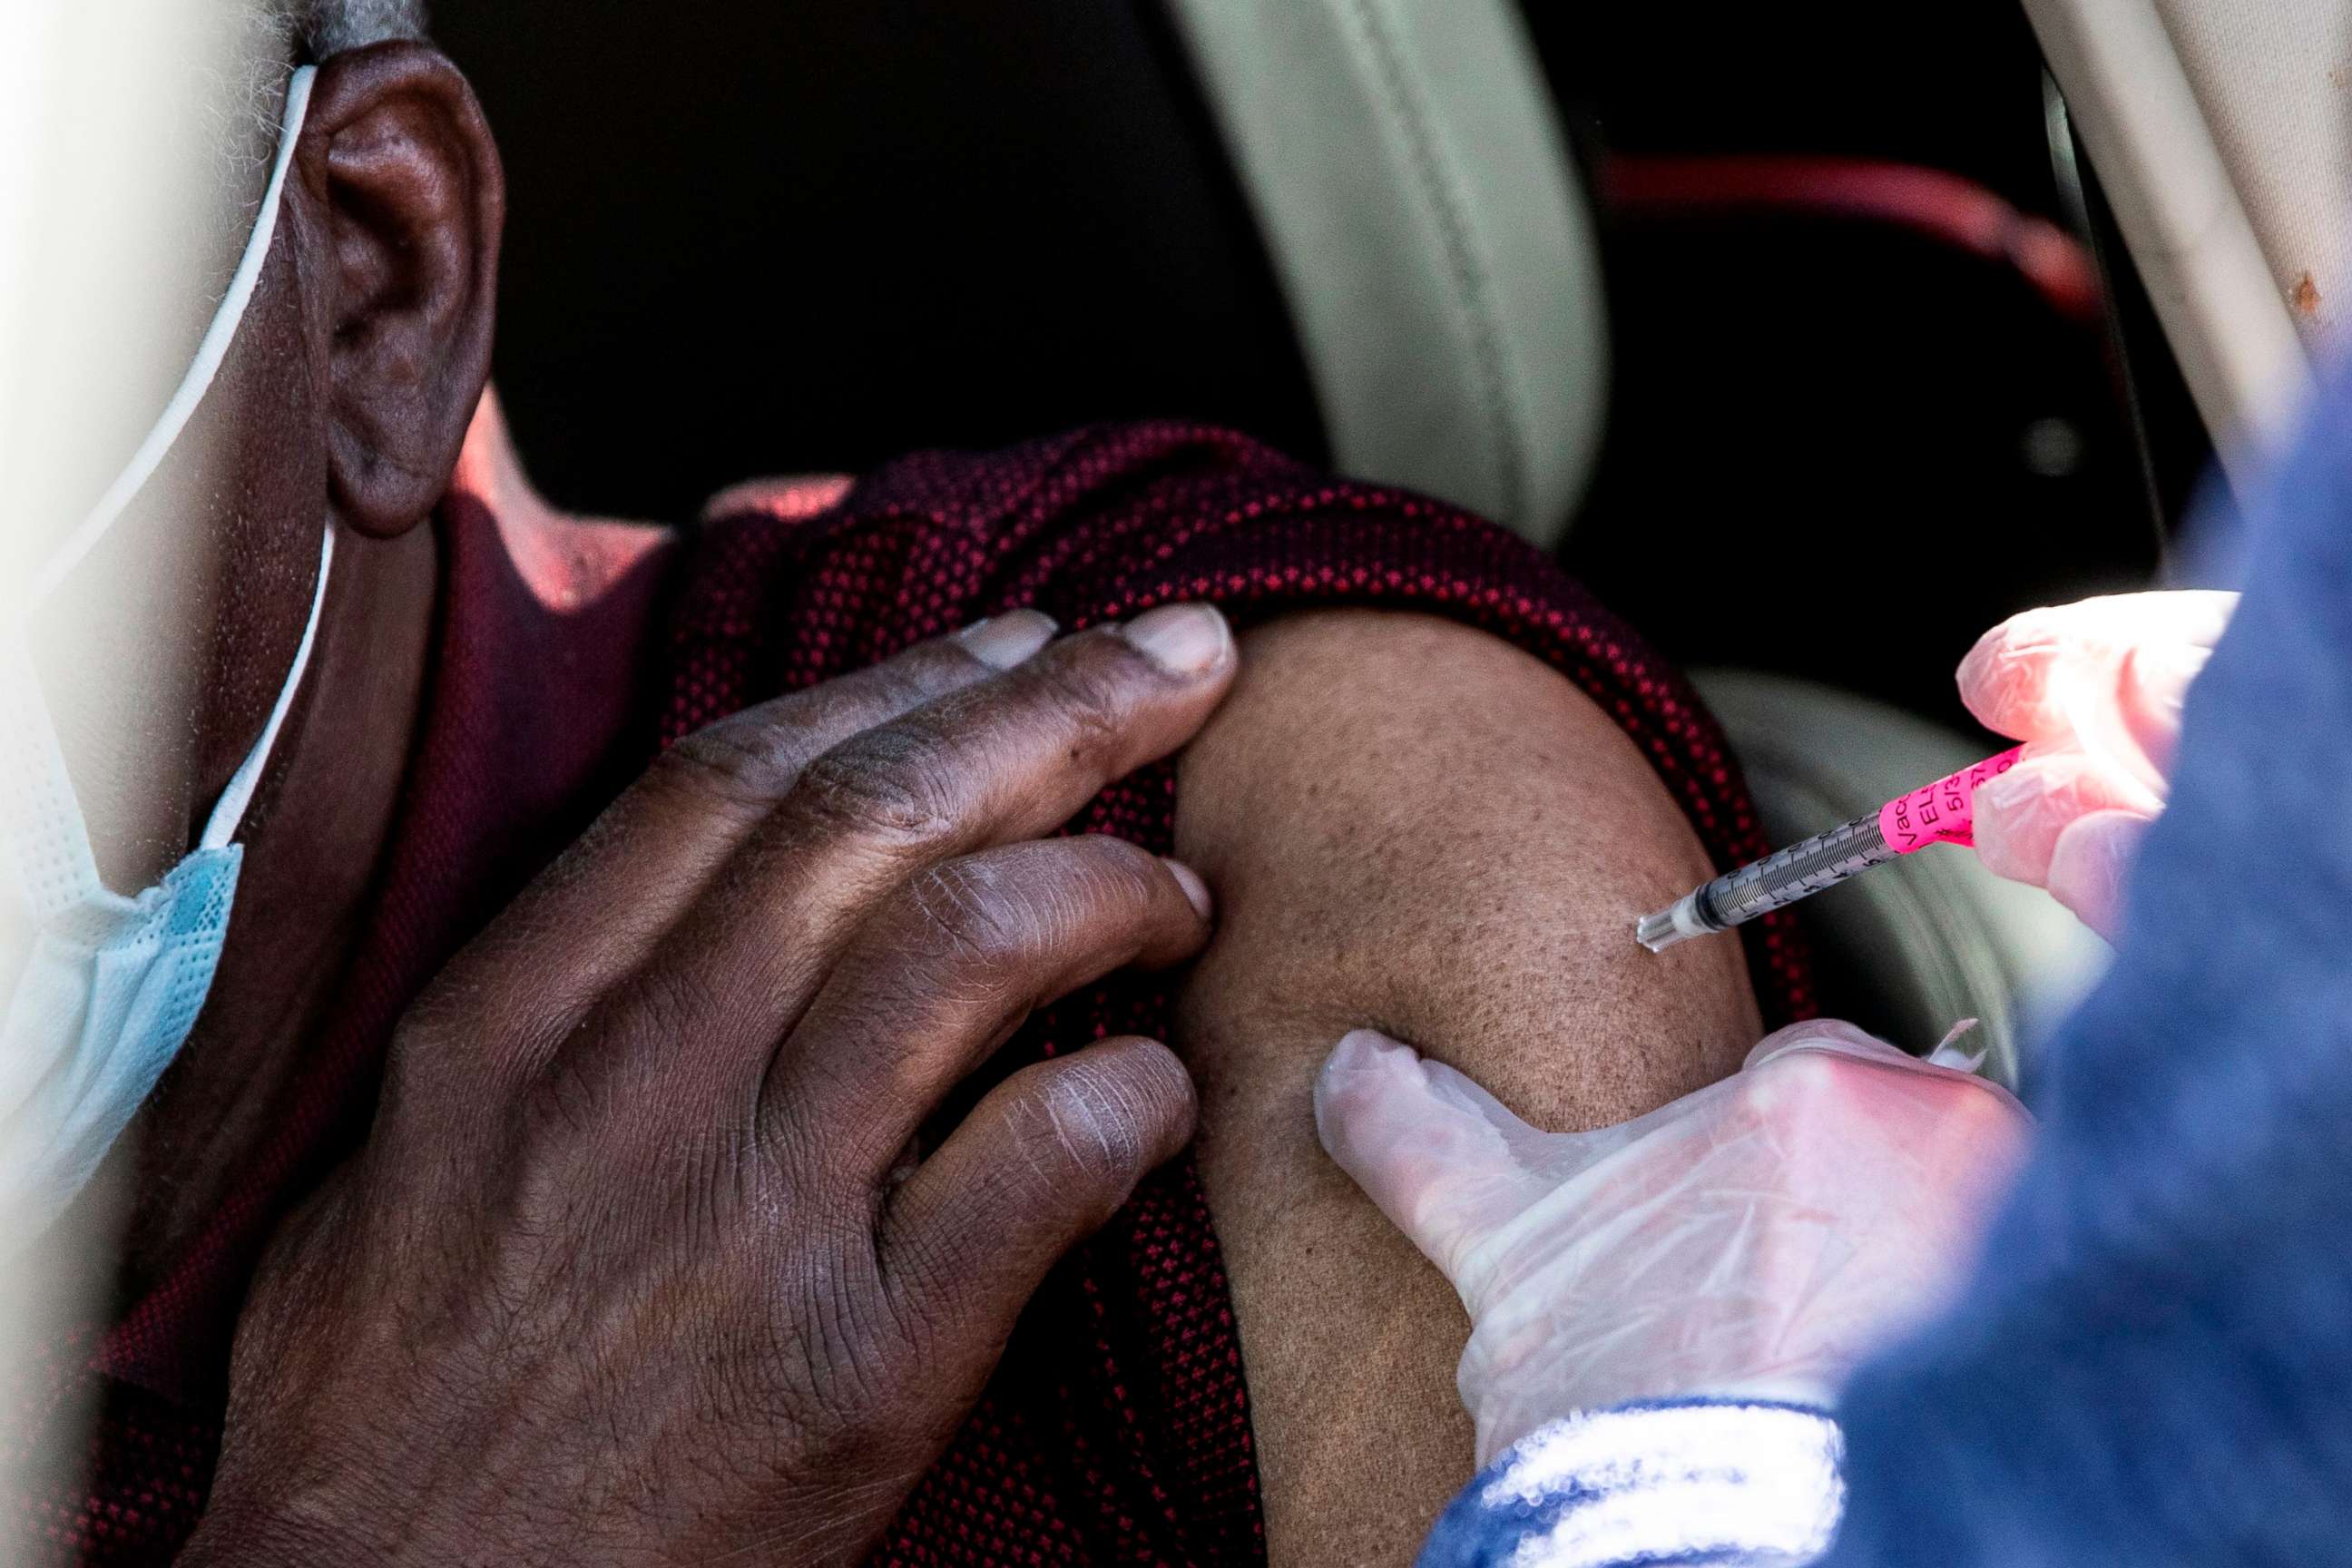 PHOTO: A man gets his first dose of the COVID-19 vaccine administered during mass vaccinations at Coors Field baseball stadium on Jan. 30, 2021, in Denver.